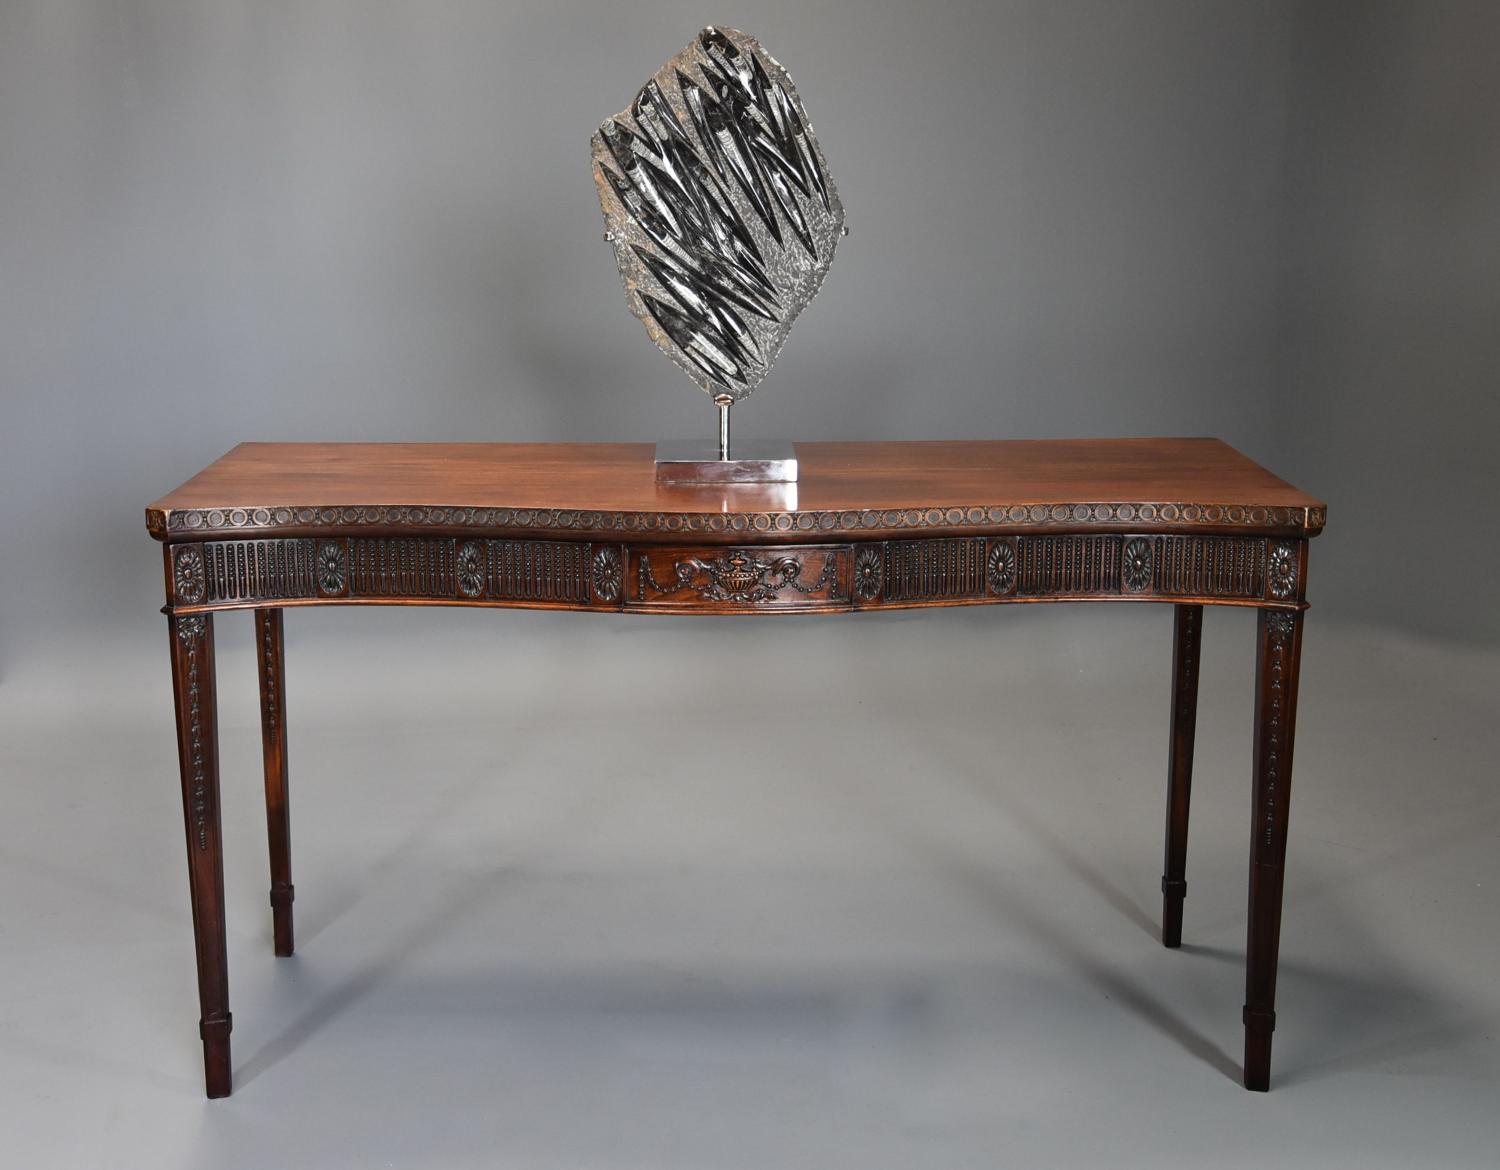 Late 19th century mahogany serving table in the Adam style